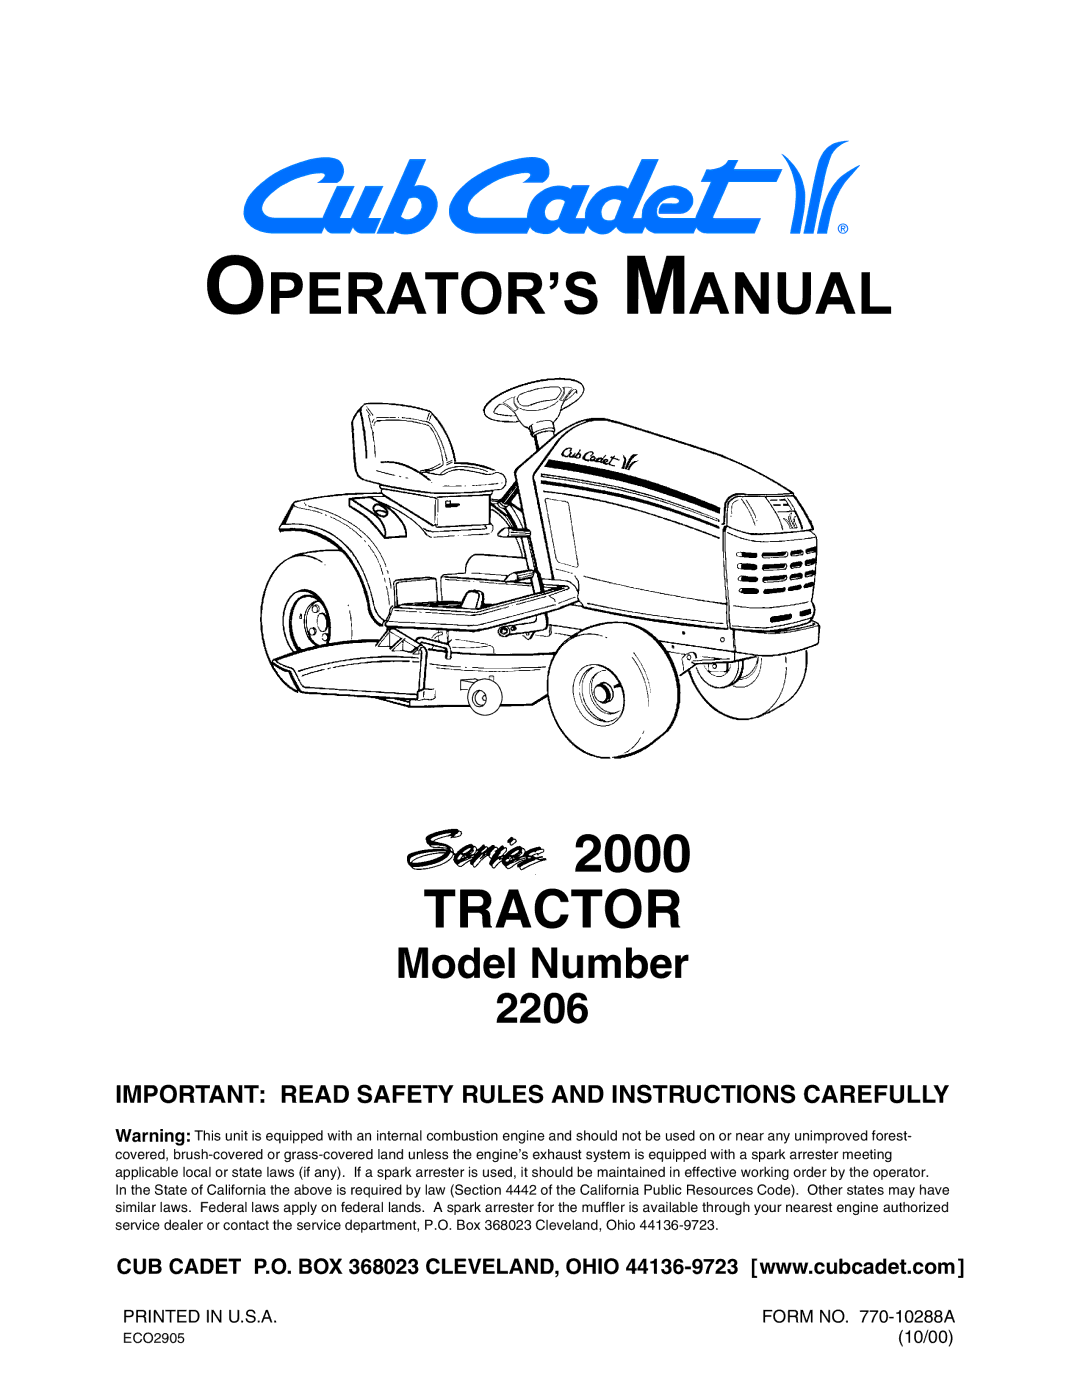 Cub Cadet 2206 manual OPERATOR’S Manual, Important Read Safety Rules and Instructions Carefully 